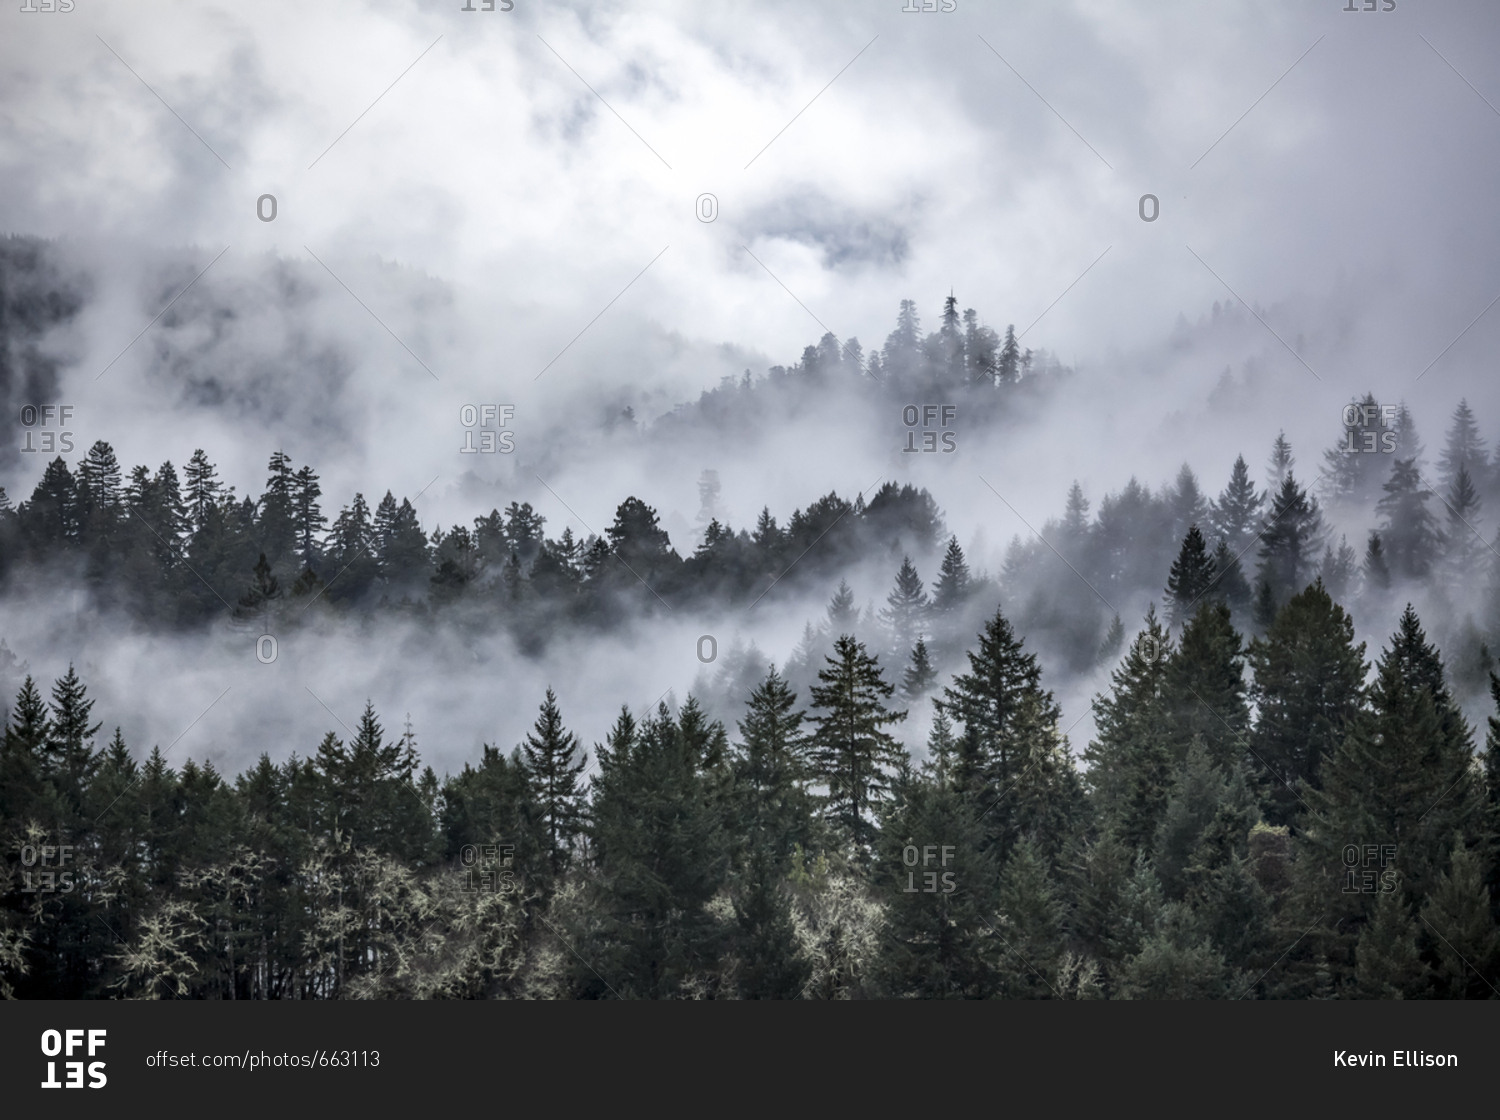 Pine trees in the coastal mountains of Humboldt County, California obscured by clouds and mist